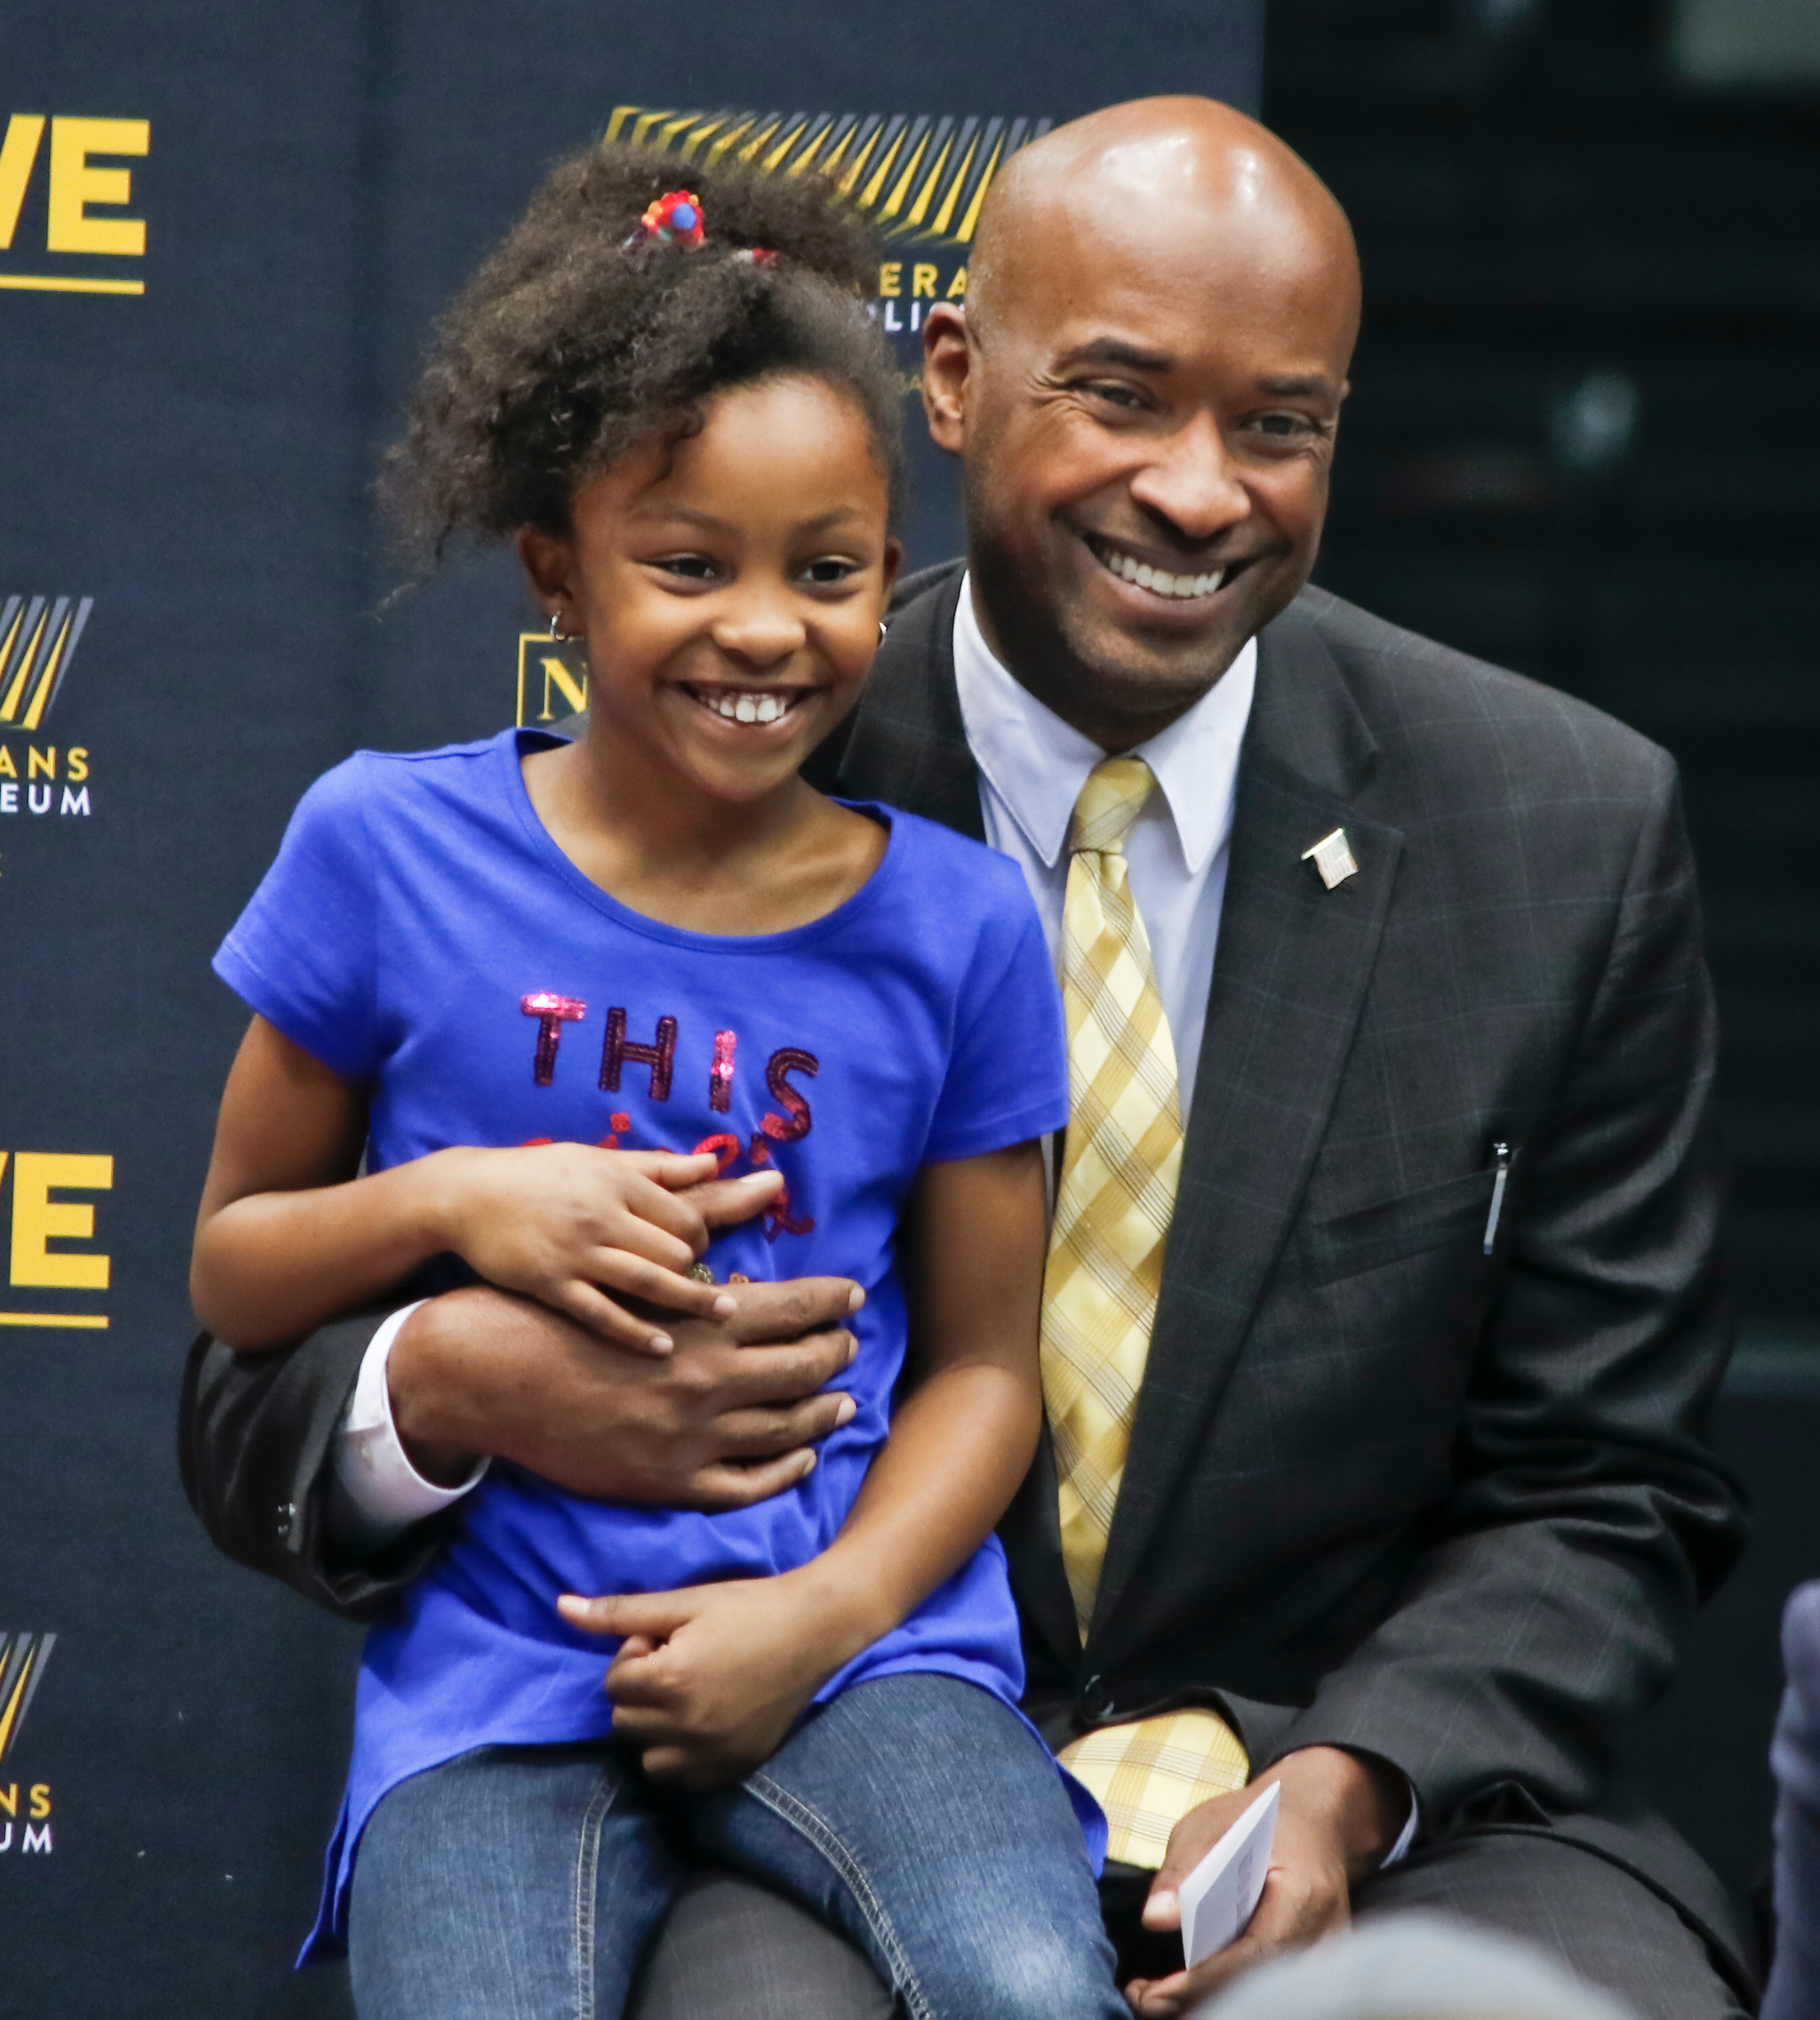 Kevan Abrahams and his daughter during the Nassau Coliseum Tour on March 31st.